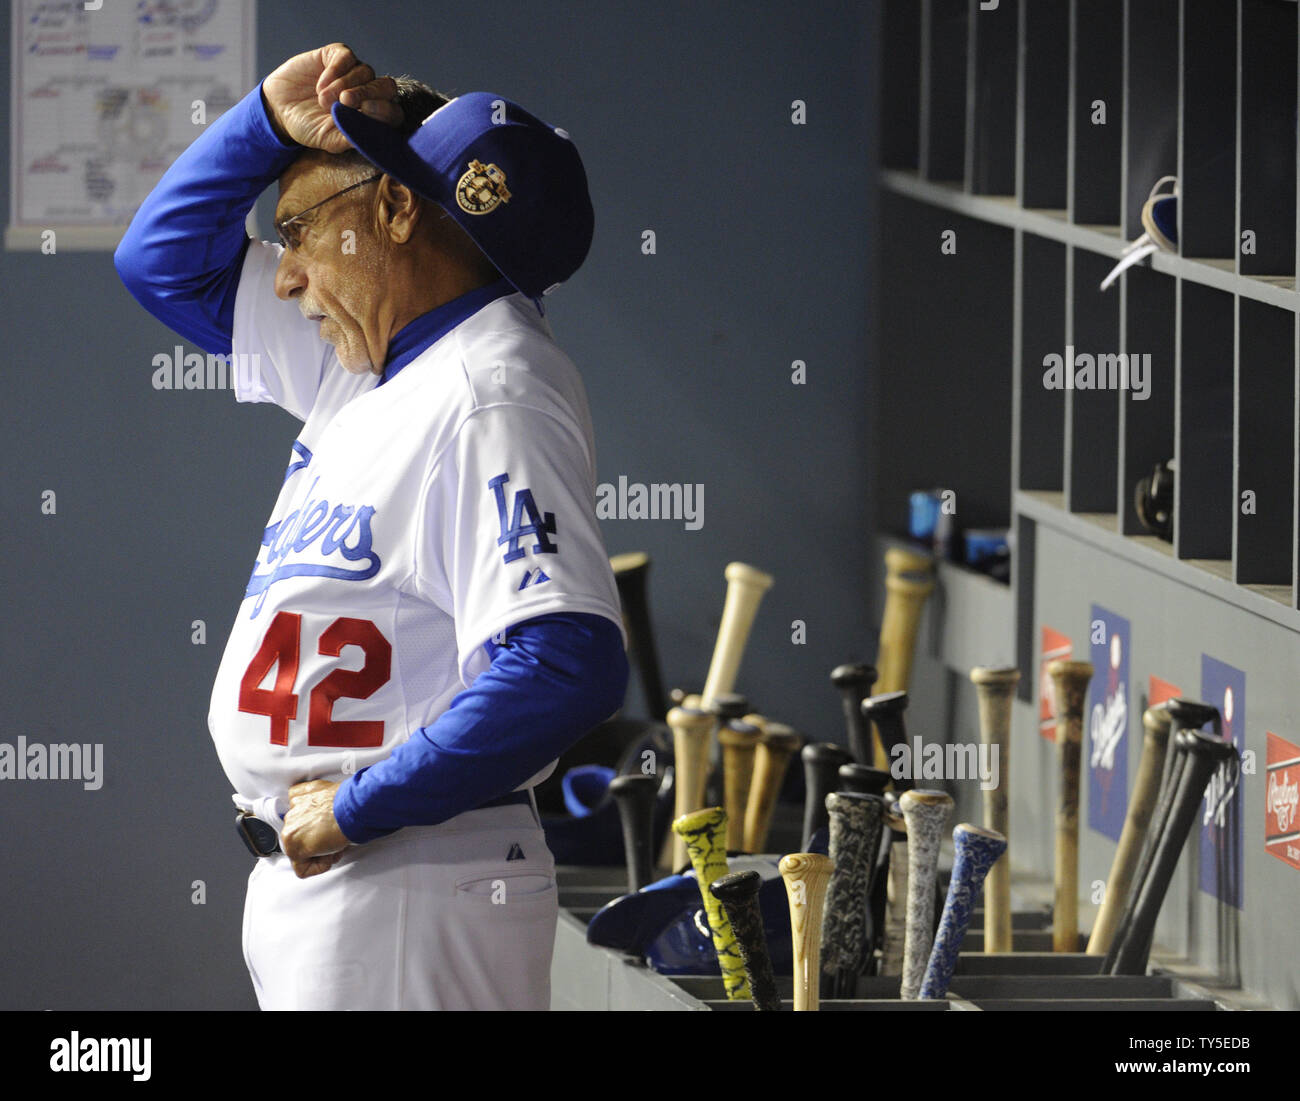 Dodgers Dugout: Jackie Robinson has the right words; Ron Cey